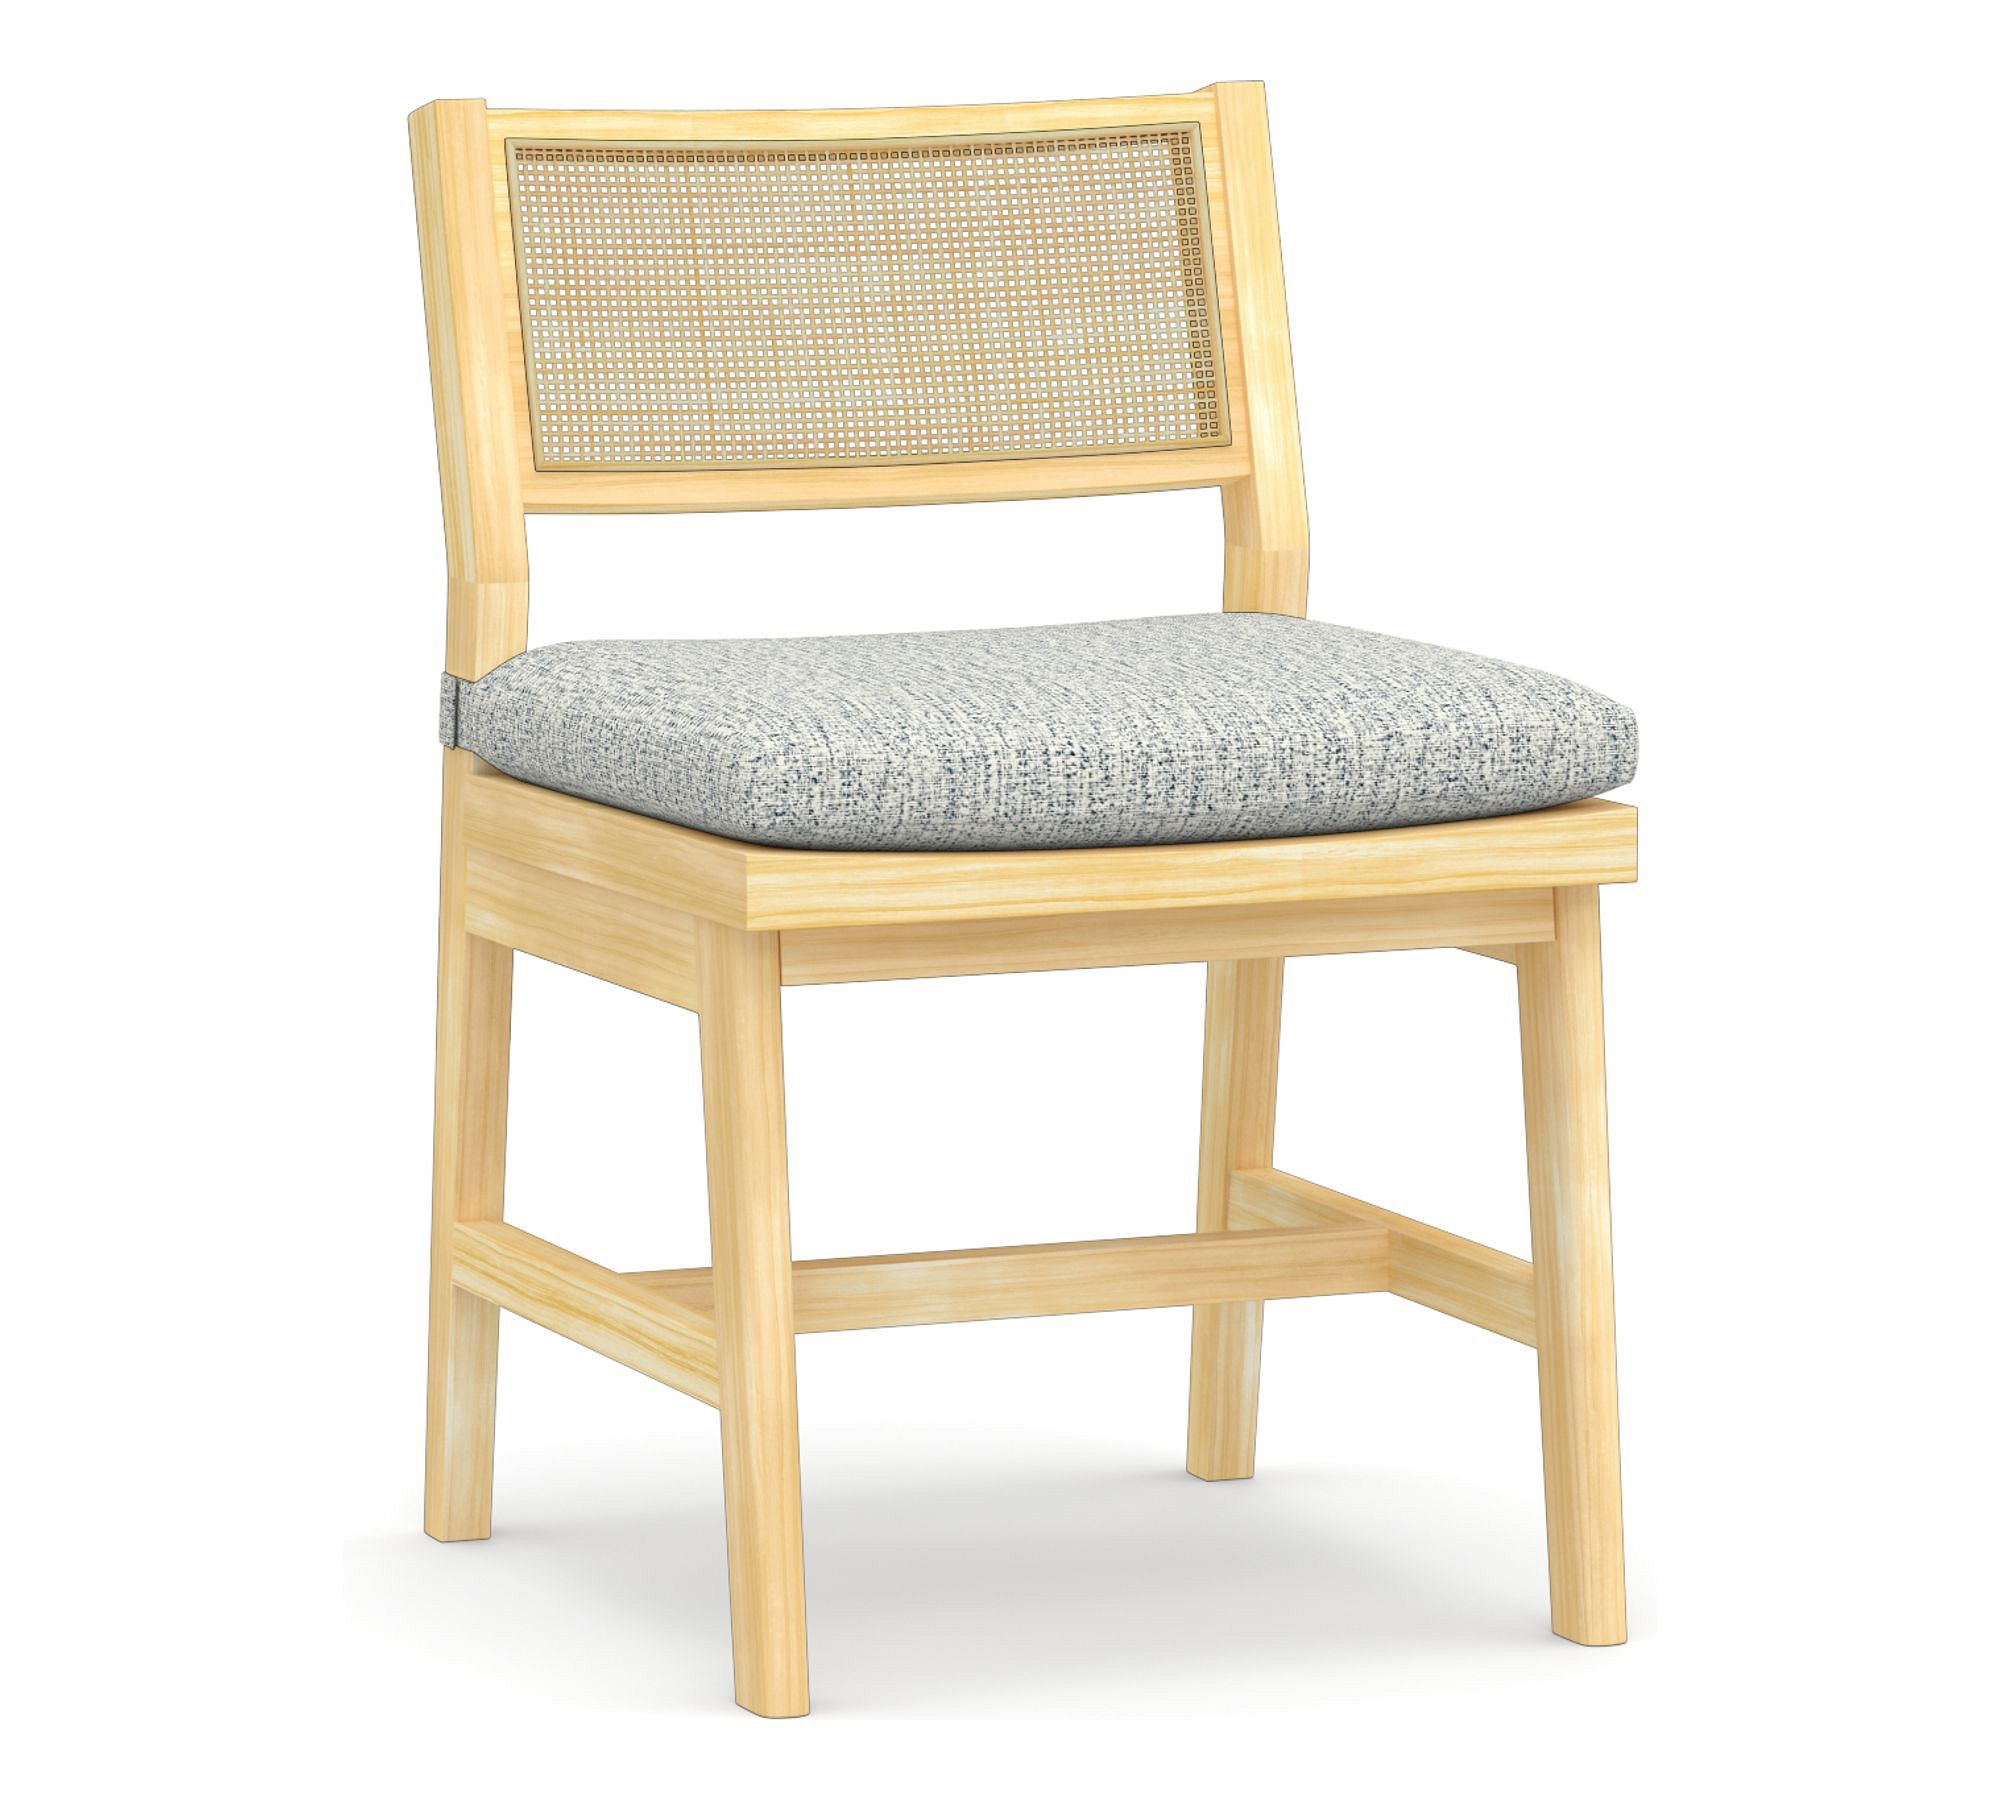 Lakeport Dining Chair Cushion